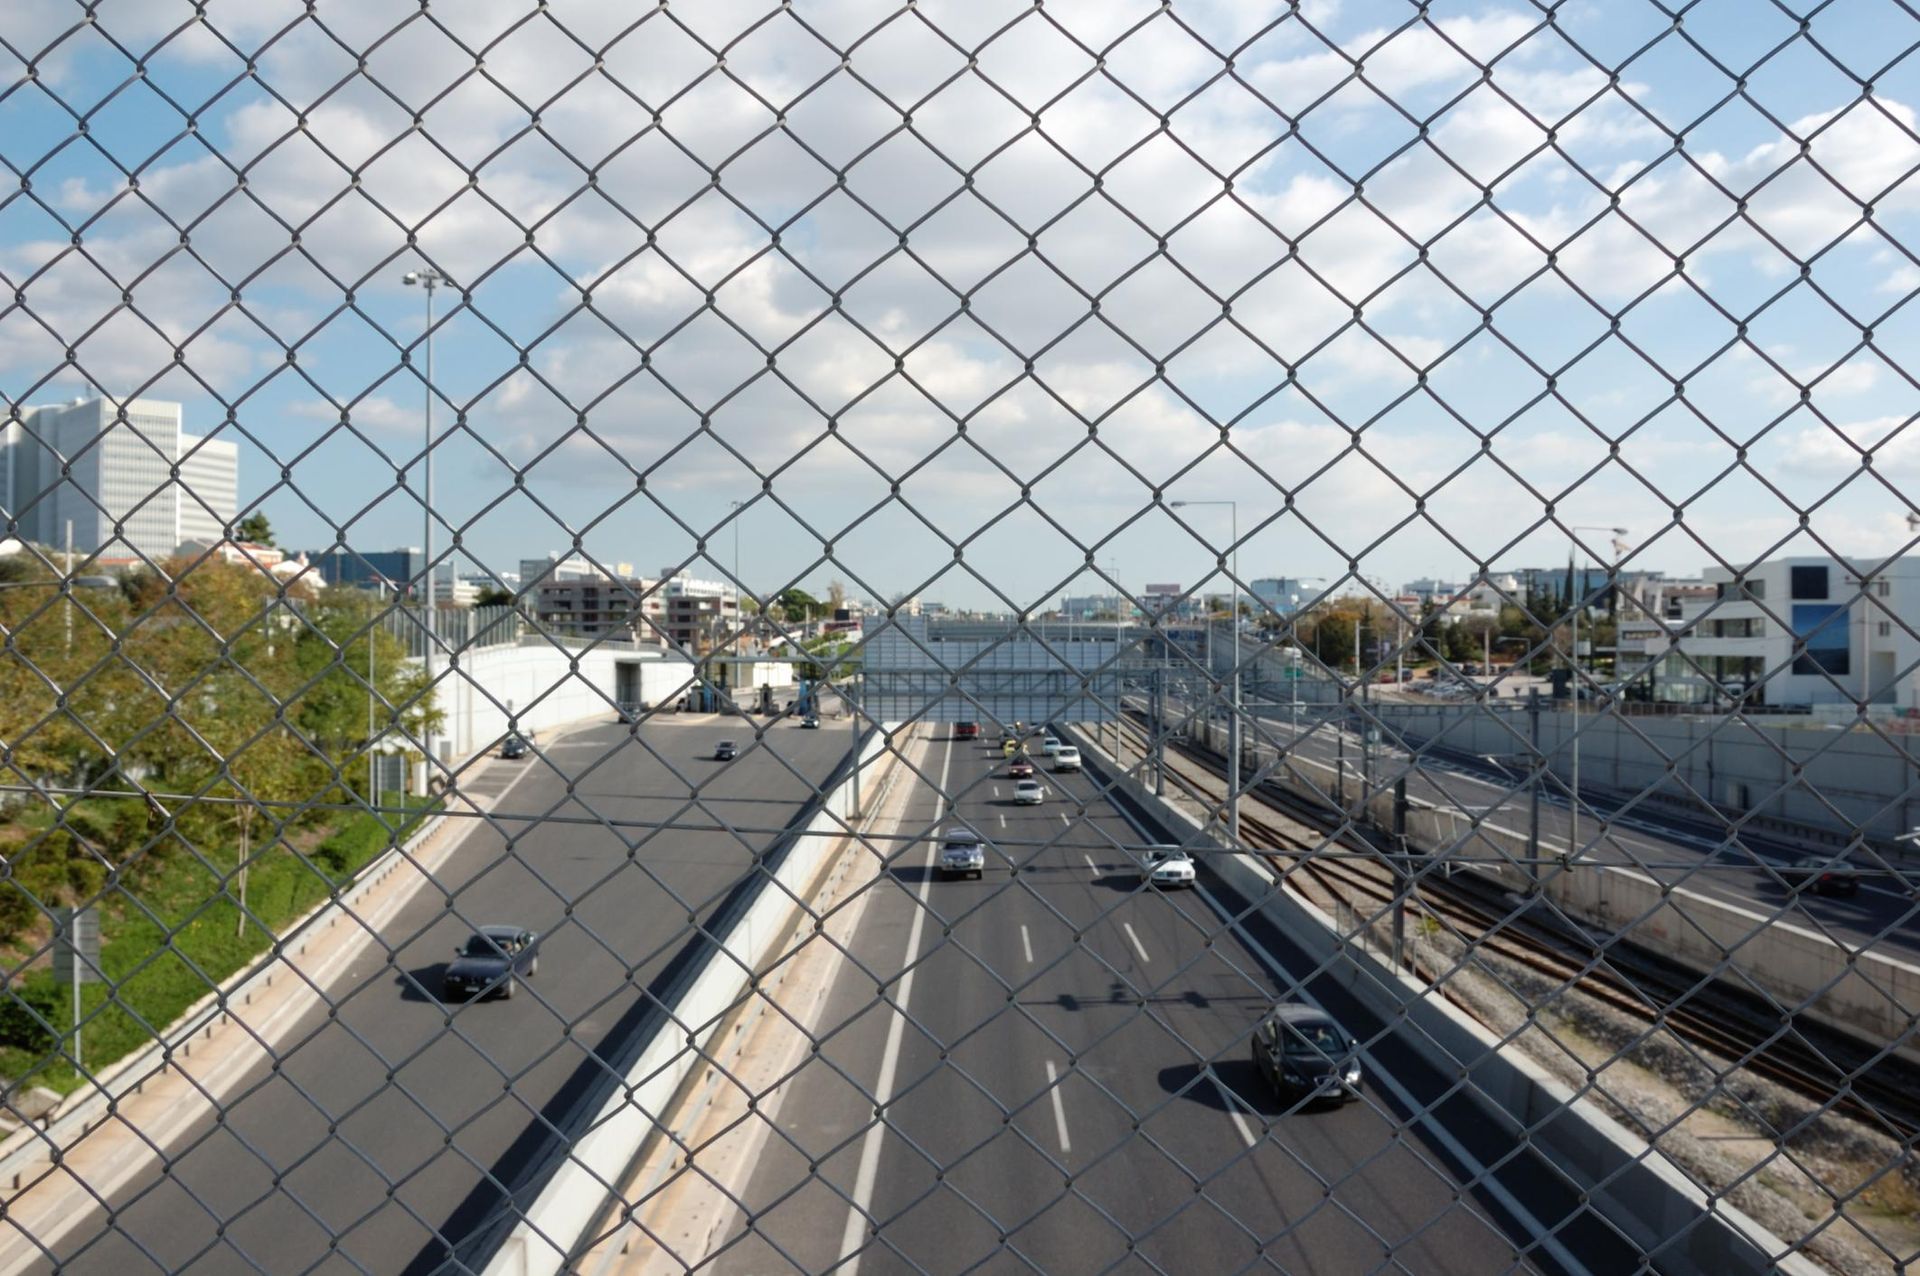 a view of a highway through a chain link fence